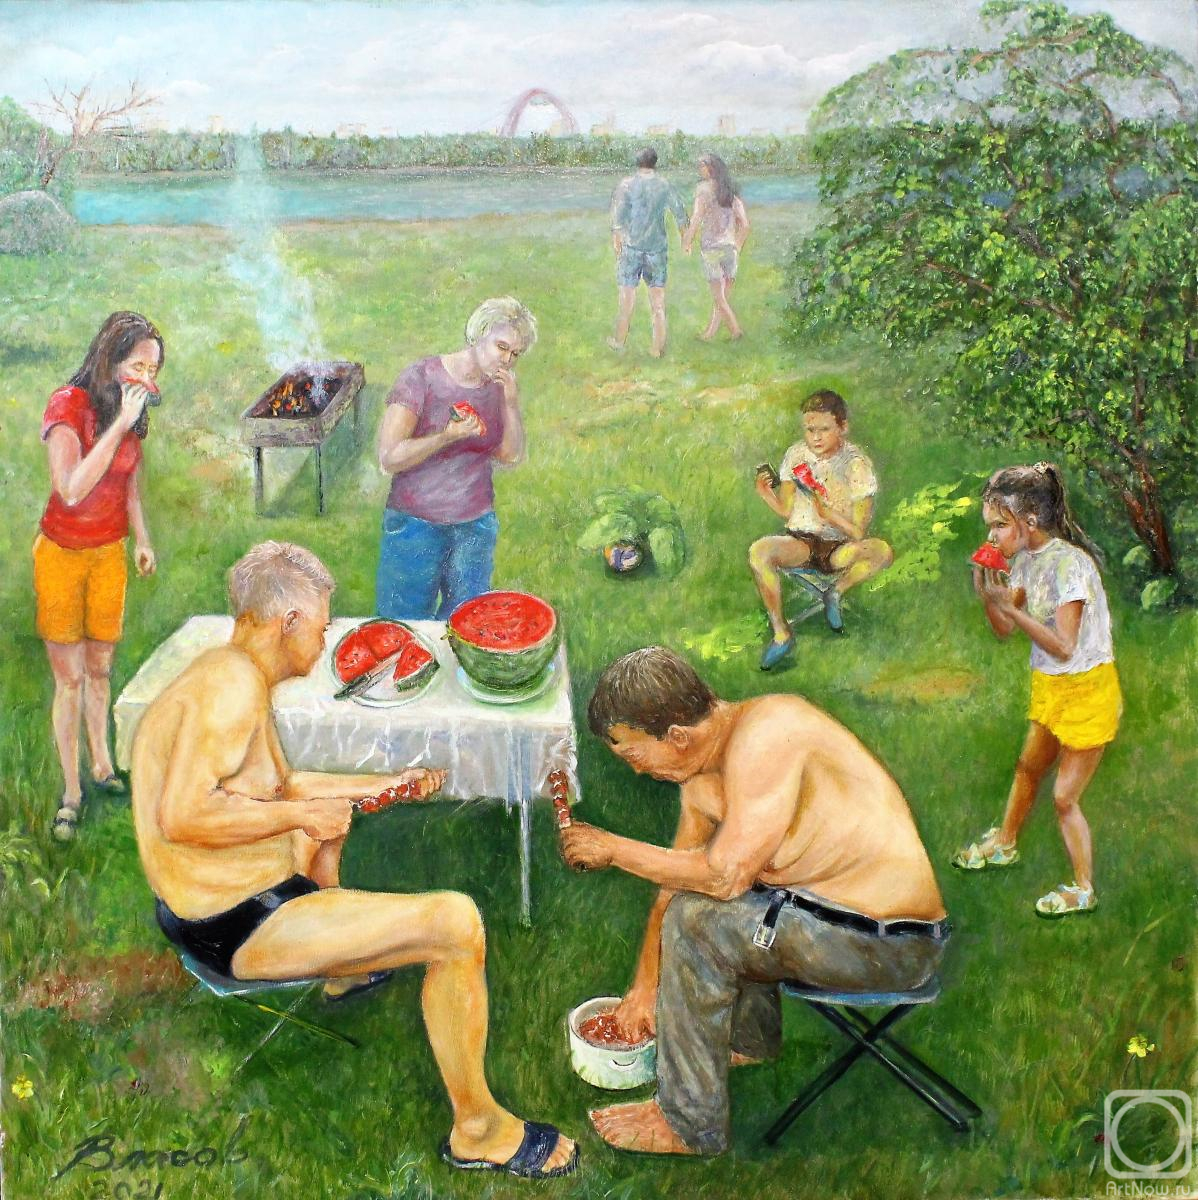 Vlasov Vyacheslav. Picnic in the park of Moscow